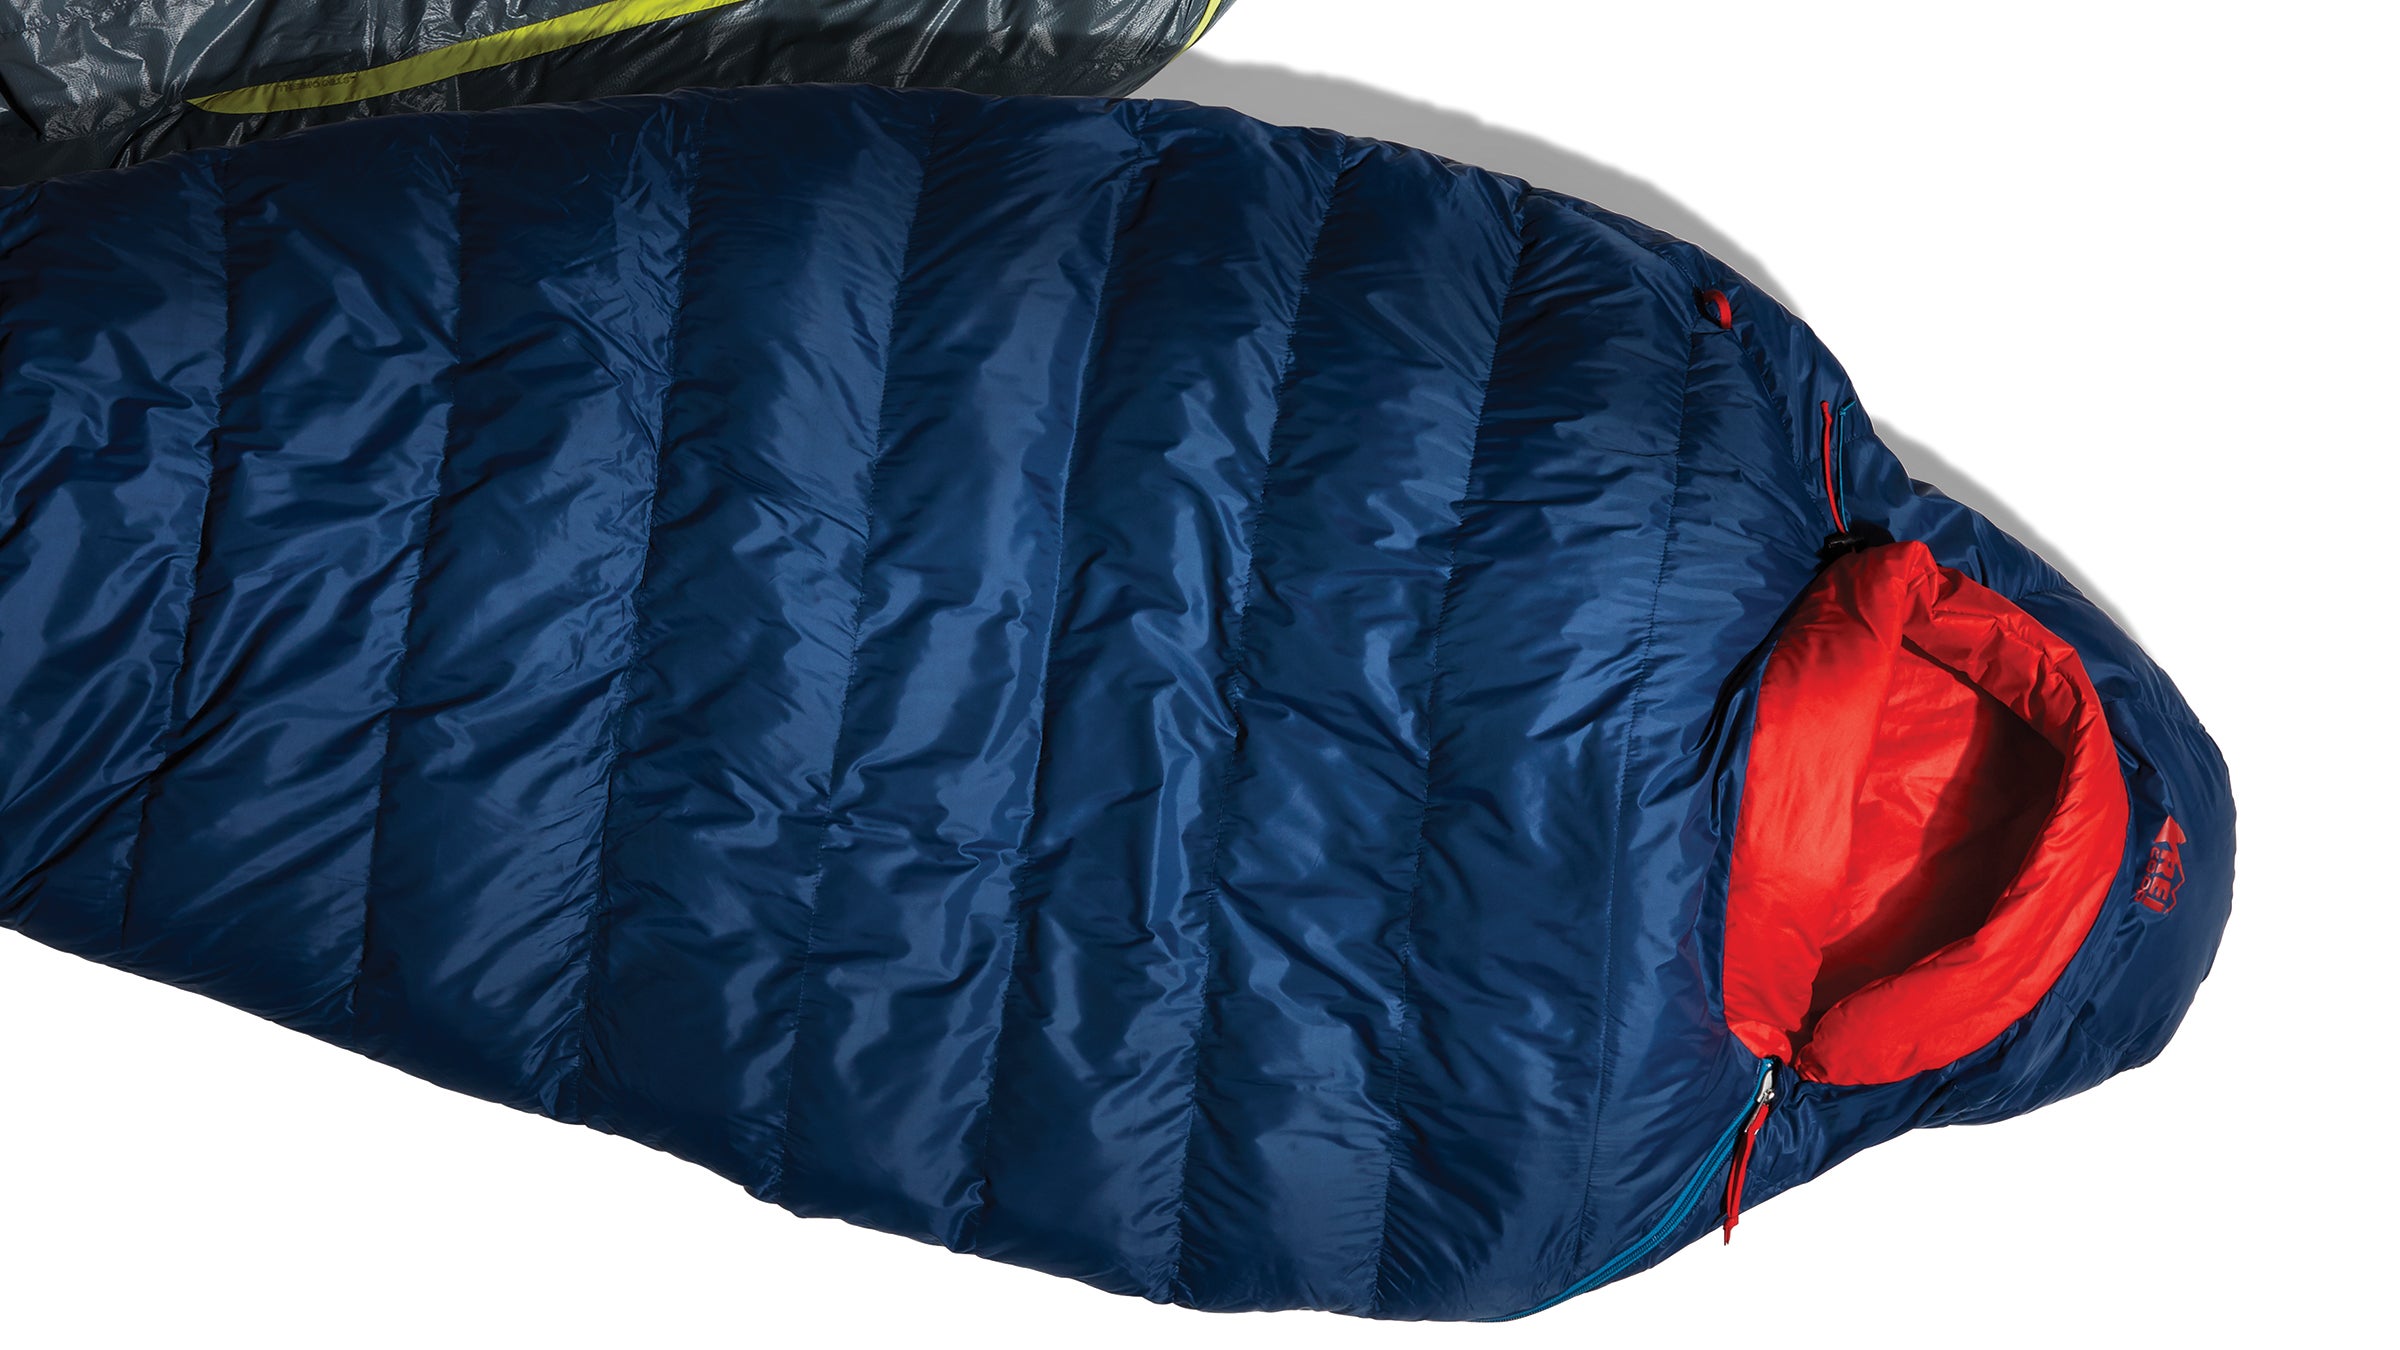 How To Wash a Sleeping Bag | Therm-a-Rest Blog